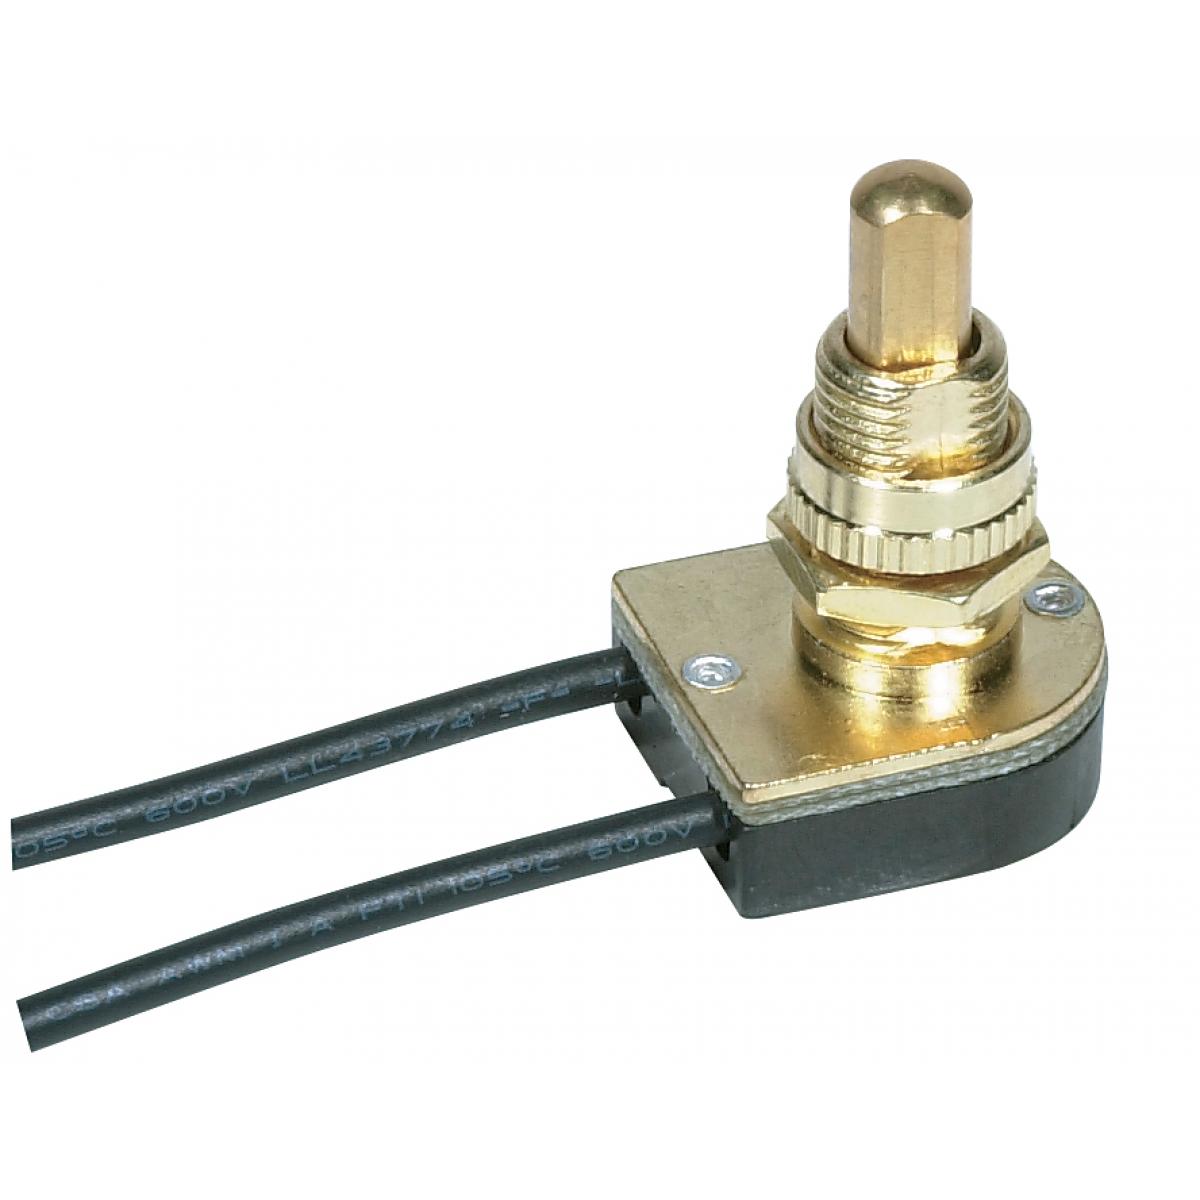 Satco 80-1126 On-Off Metal Push Switch 5/8" Metal Bushing Single Circuit 6A-125V, 3A-250V Rating Brass Finish